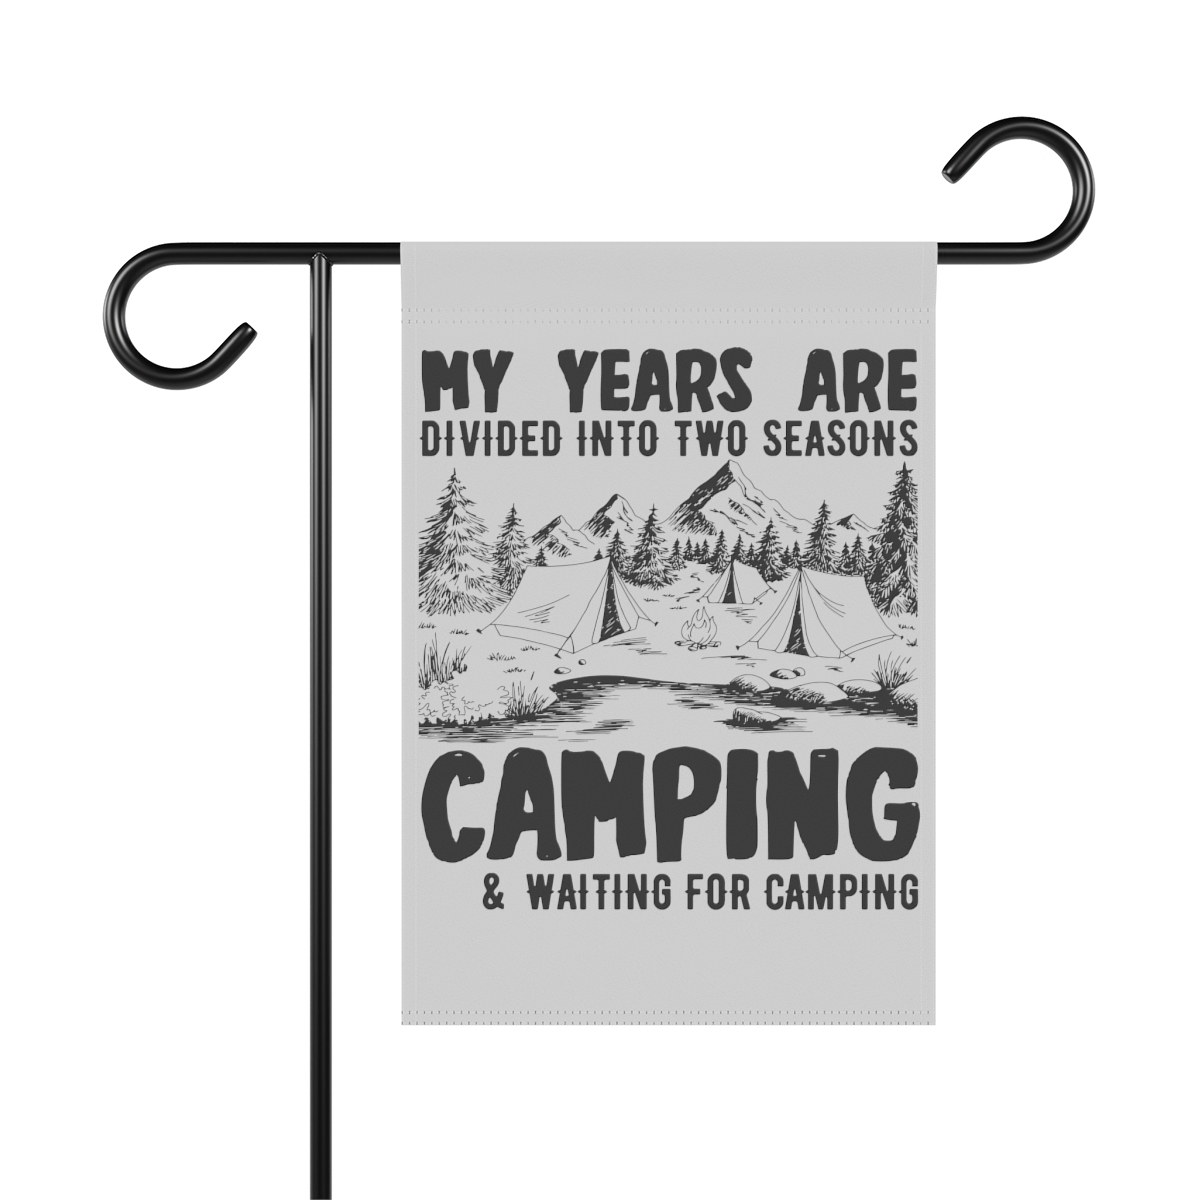 Personalized Garden & House Banner-Camping My Years are Divided into 2 Seasons-B - $19.57 - $31.93